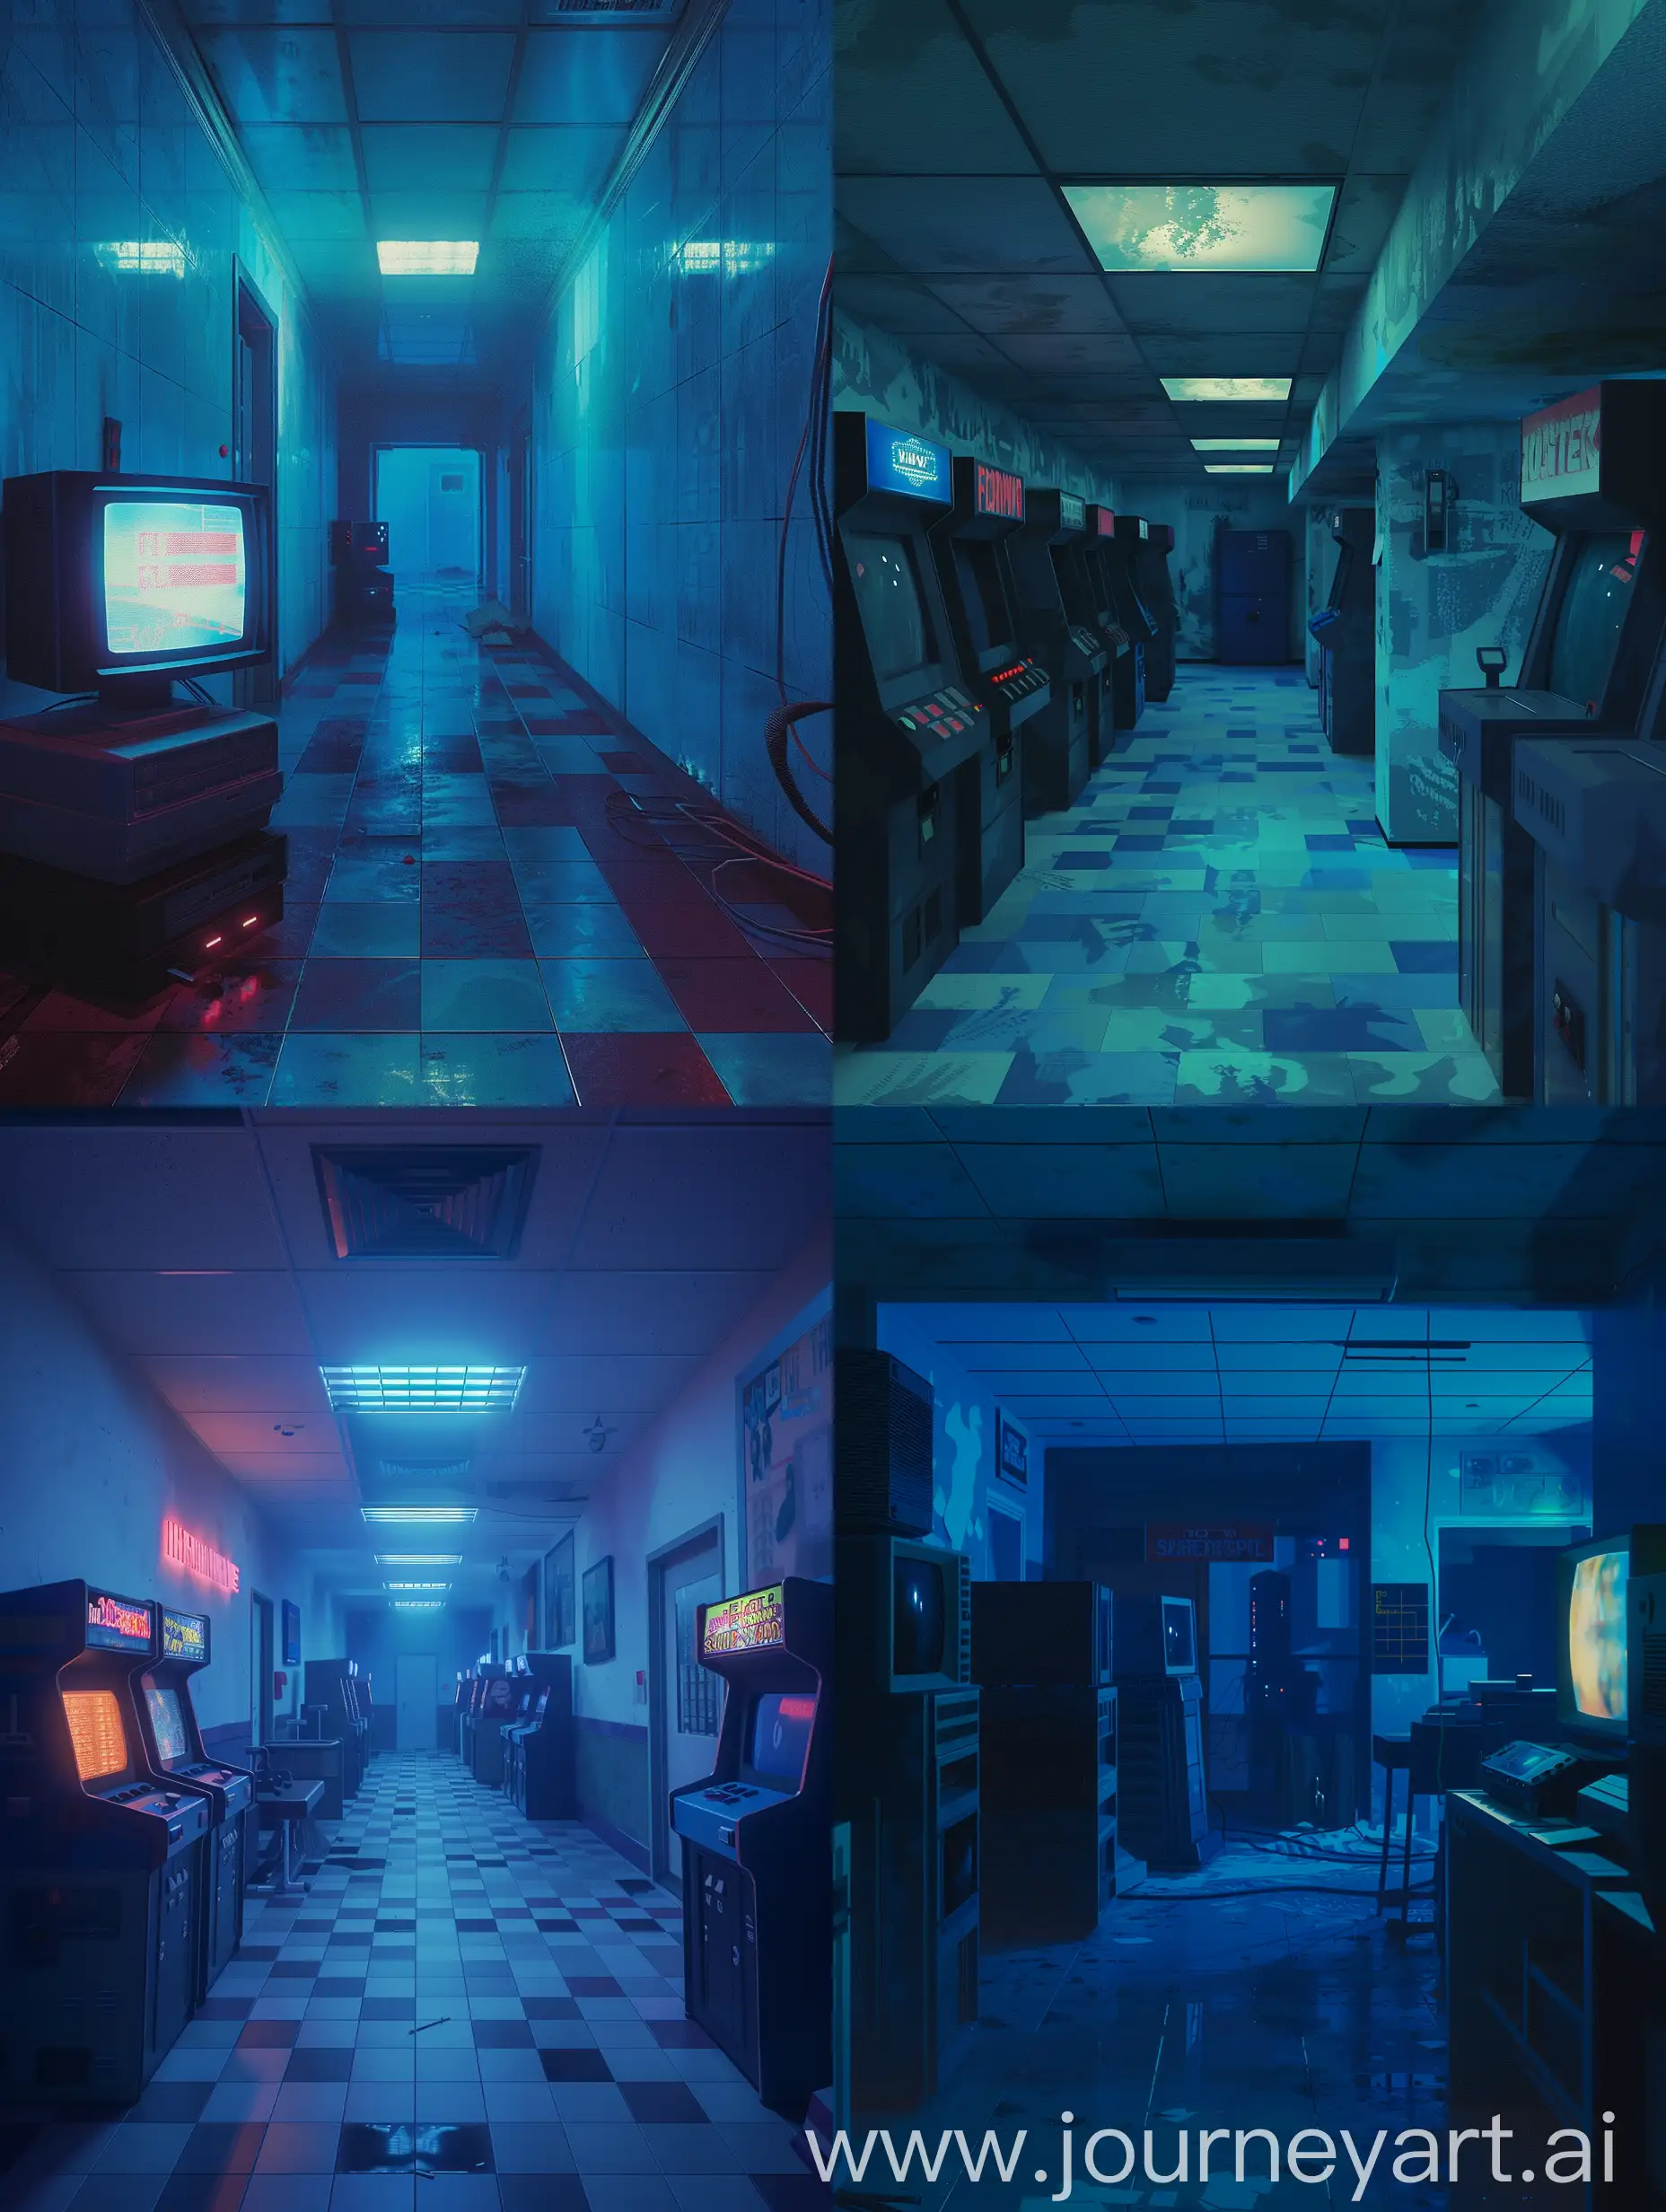 Early 2000s found footage, empty blockbuster, muted blue tones, low poly, nintendo 64 graphics